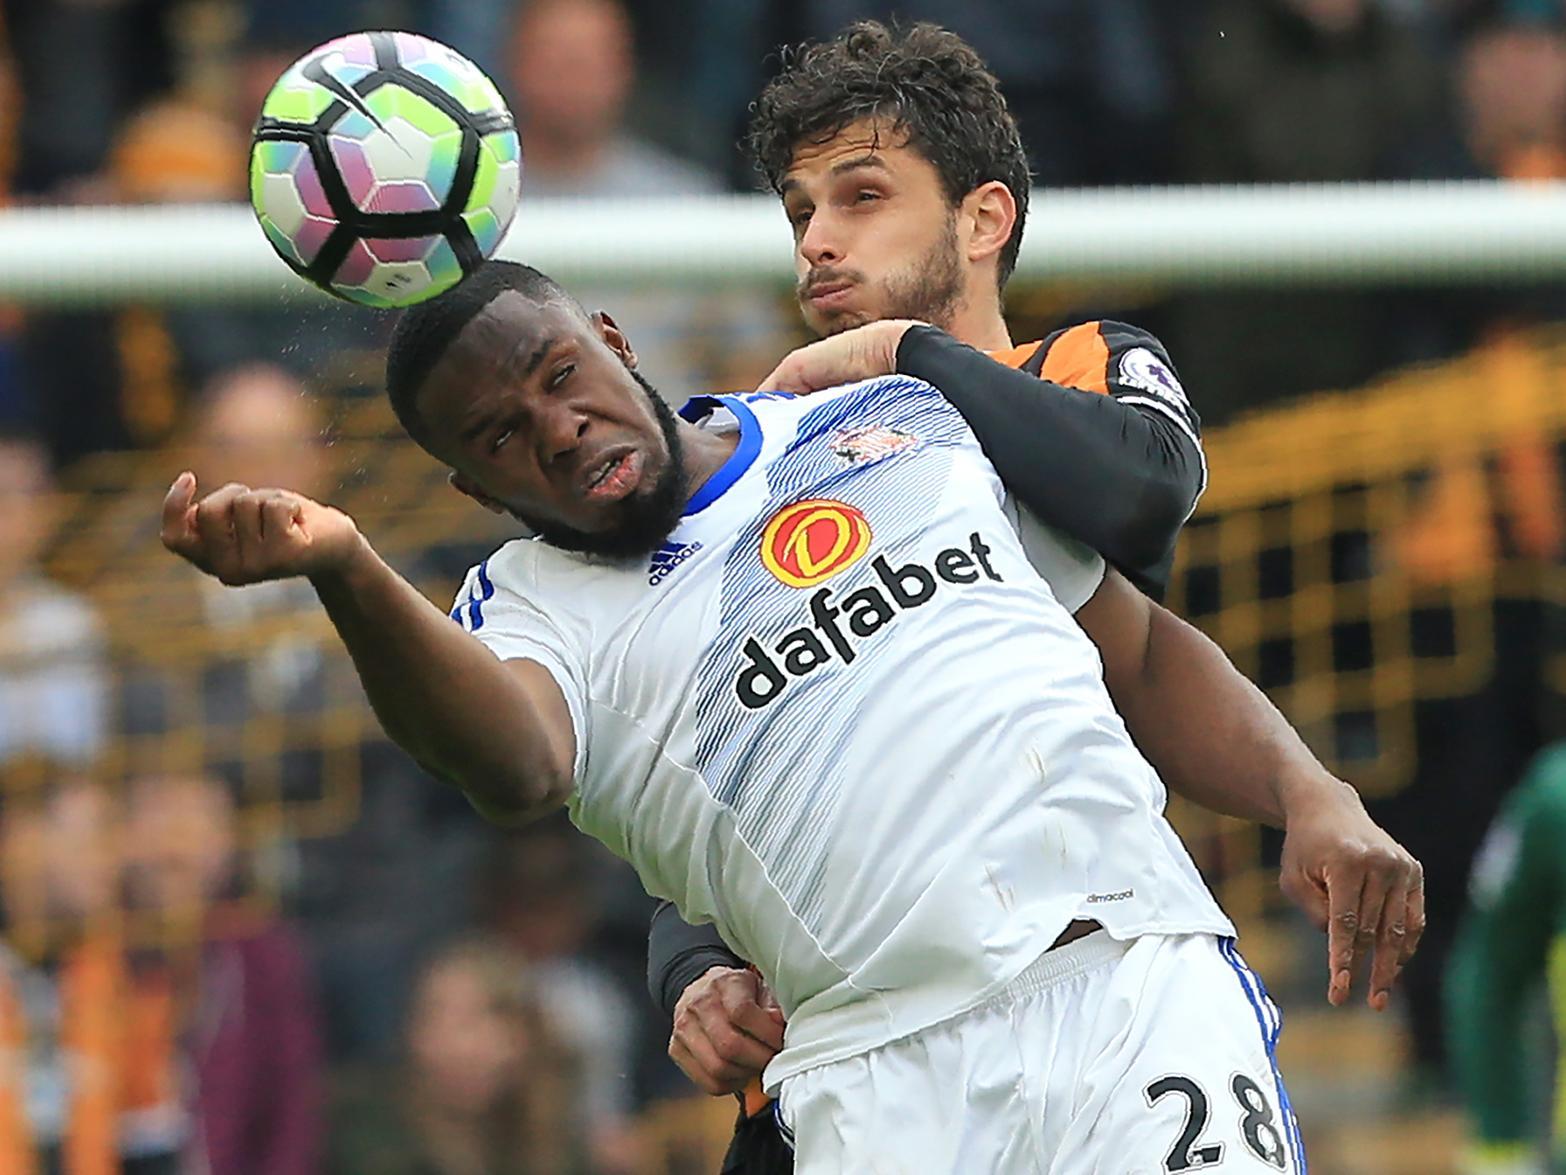 Former Everton striker and Sunderland Victor Anichebe remains a free agent after a trial at Doncaster Rovers failed to result in him landing a permanent contract. (Sunderland Echo)